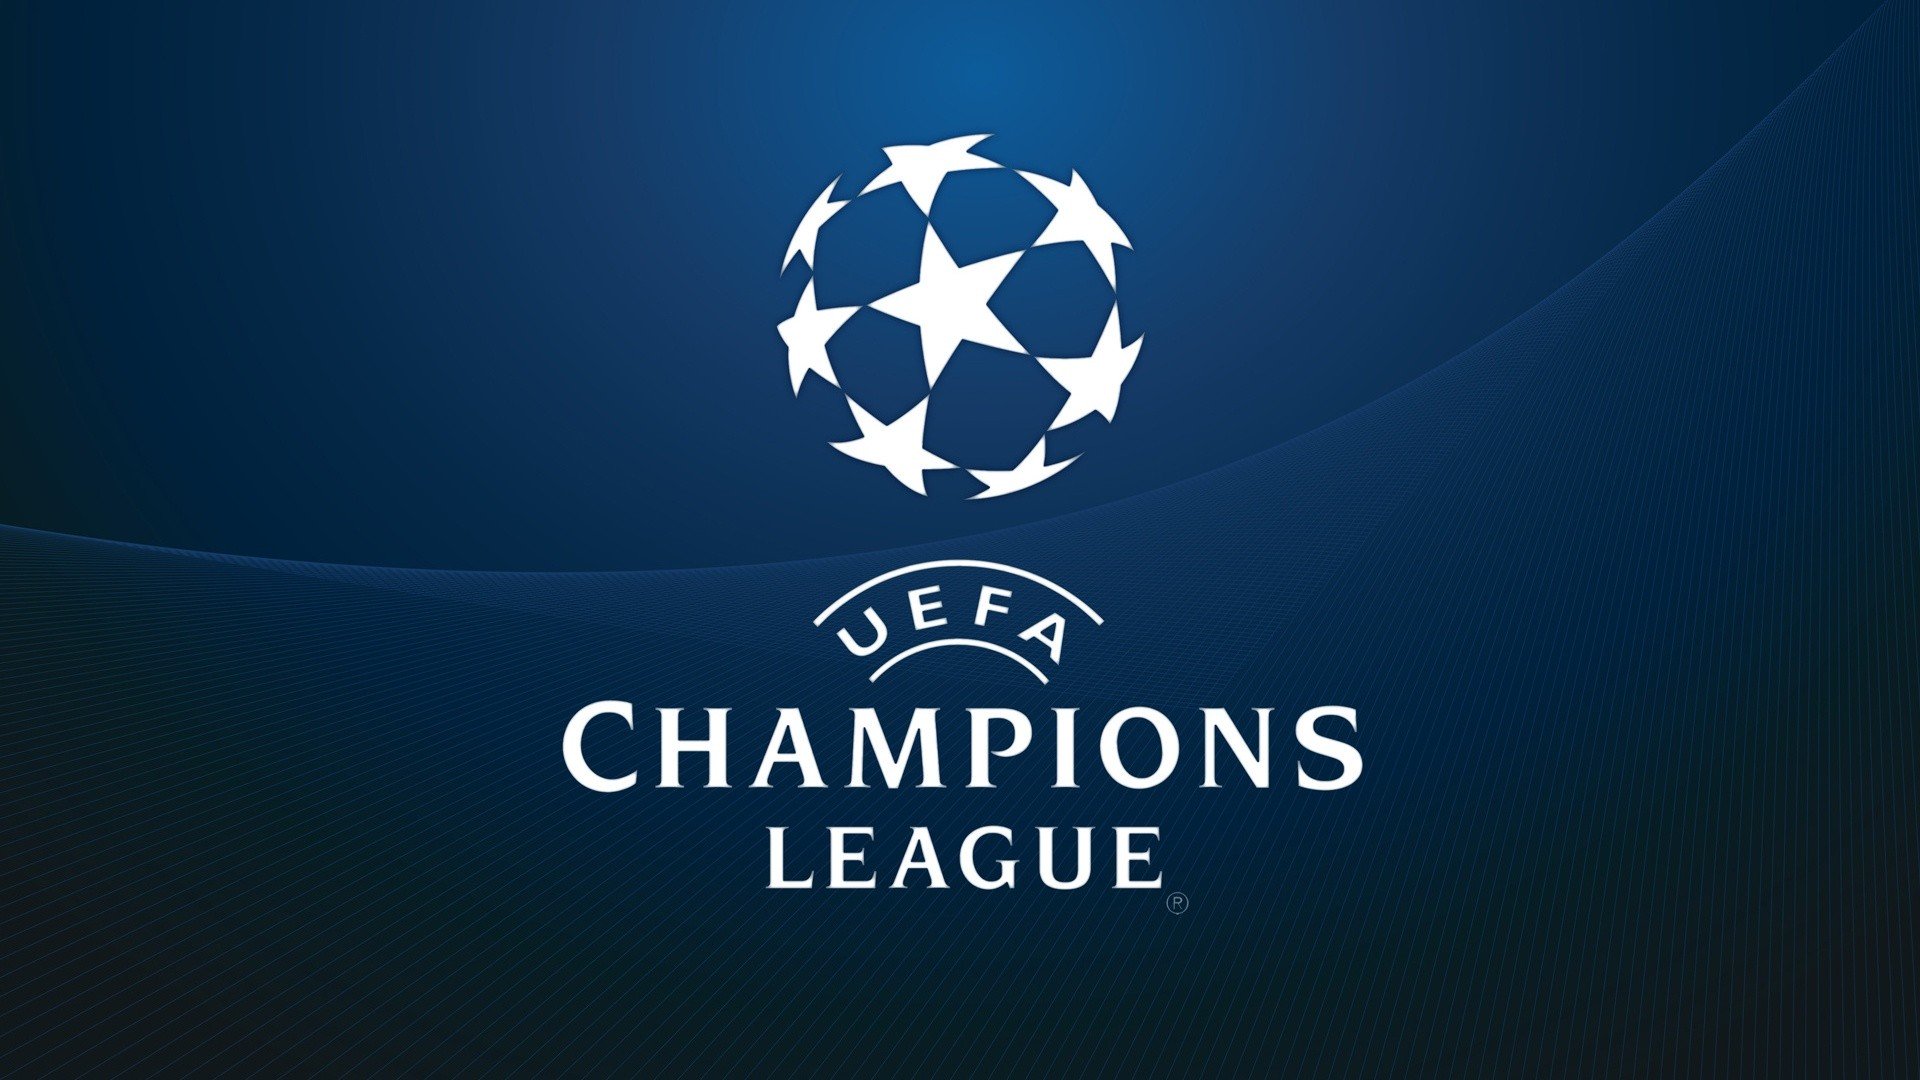 Nice wallpapers UEFA Champions League 1920x1080px